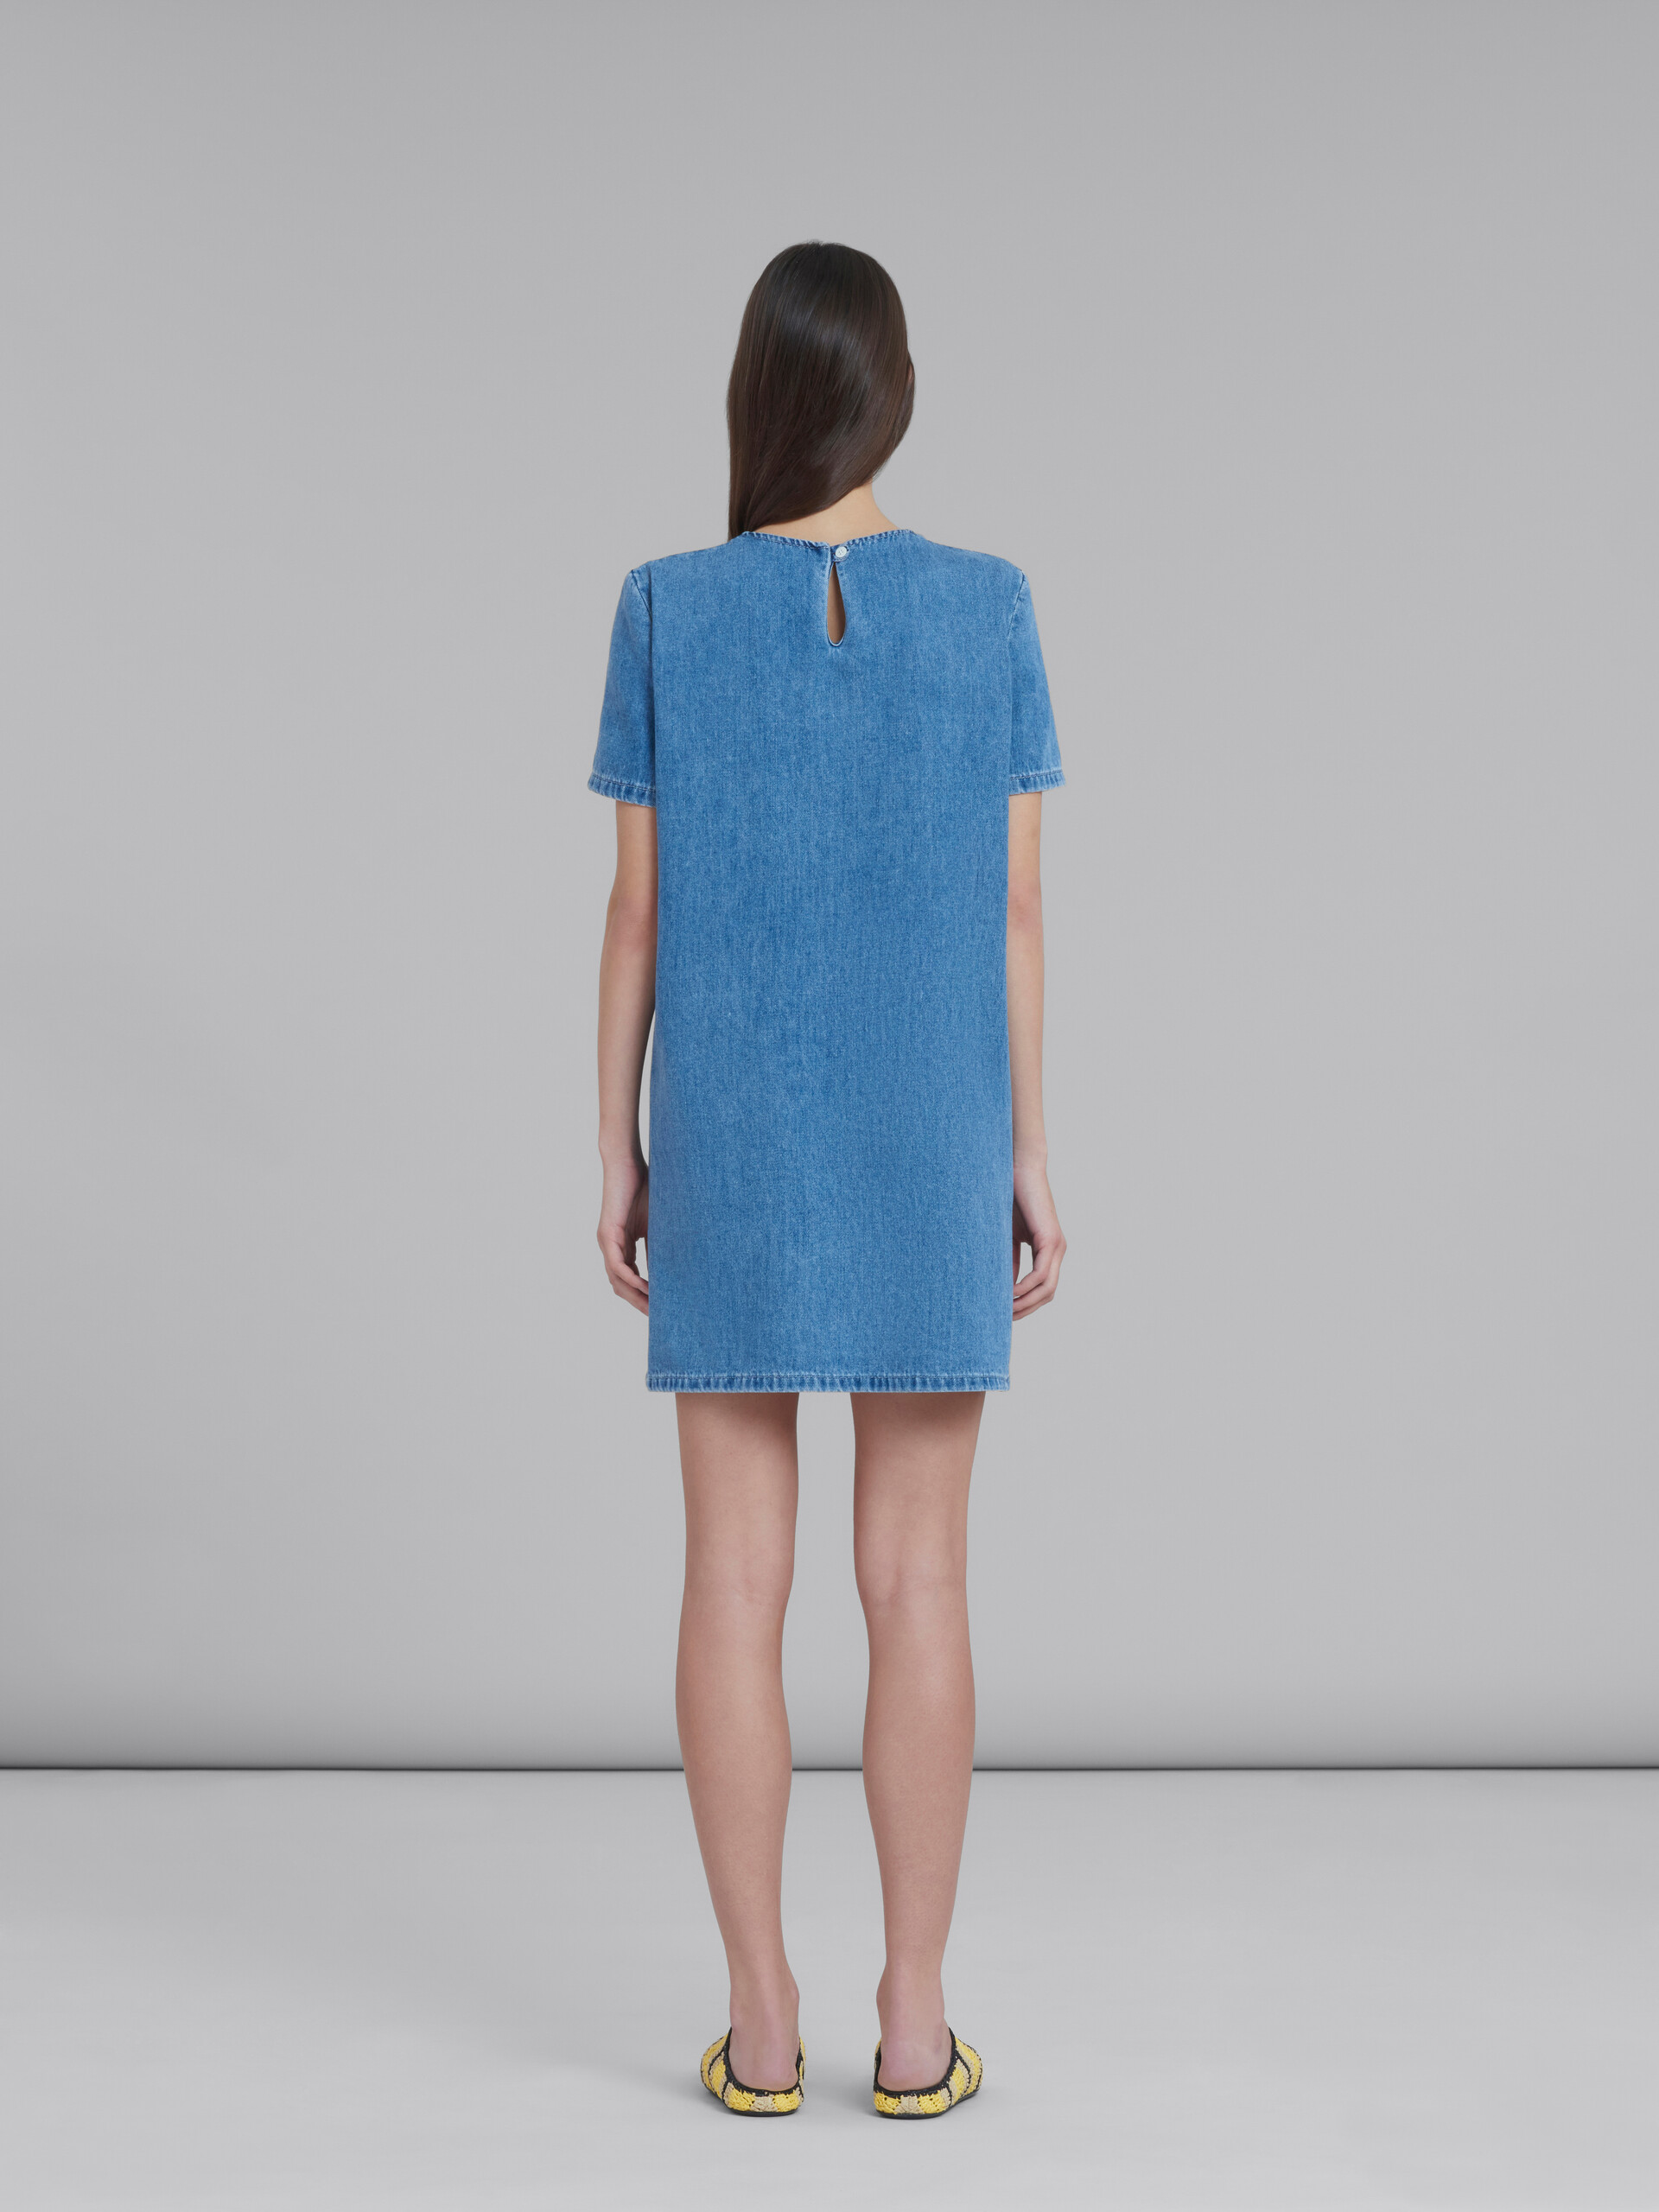 Marni x No Vacancy Inn - Blue chambray short dress with embroidery - Dresses - Image 3